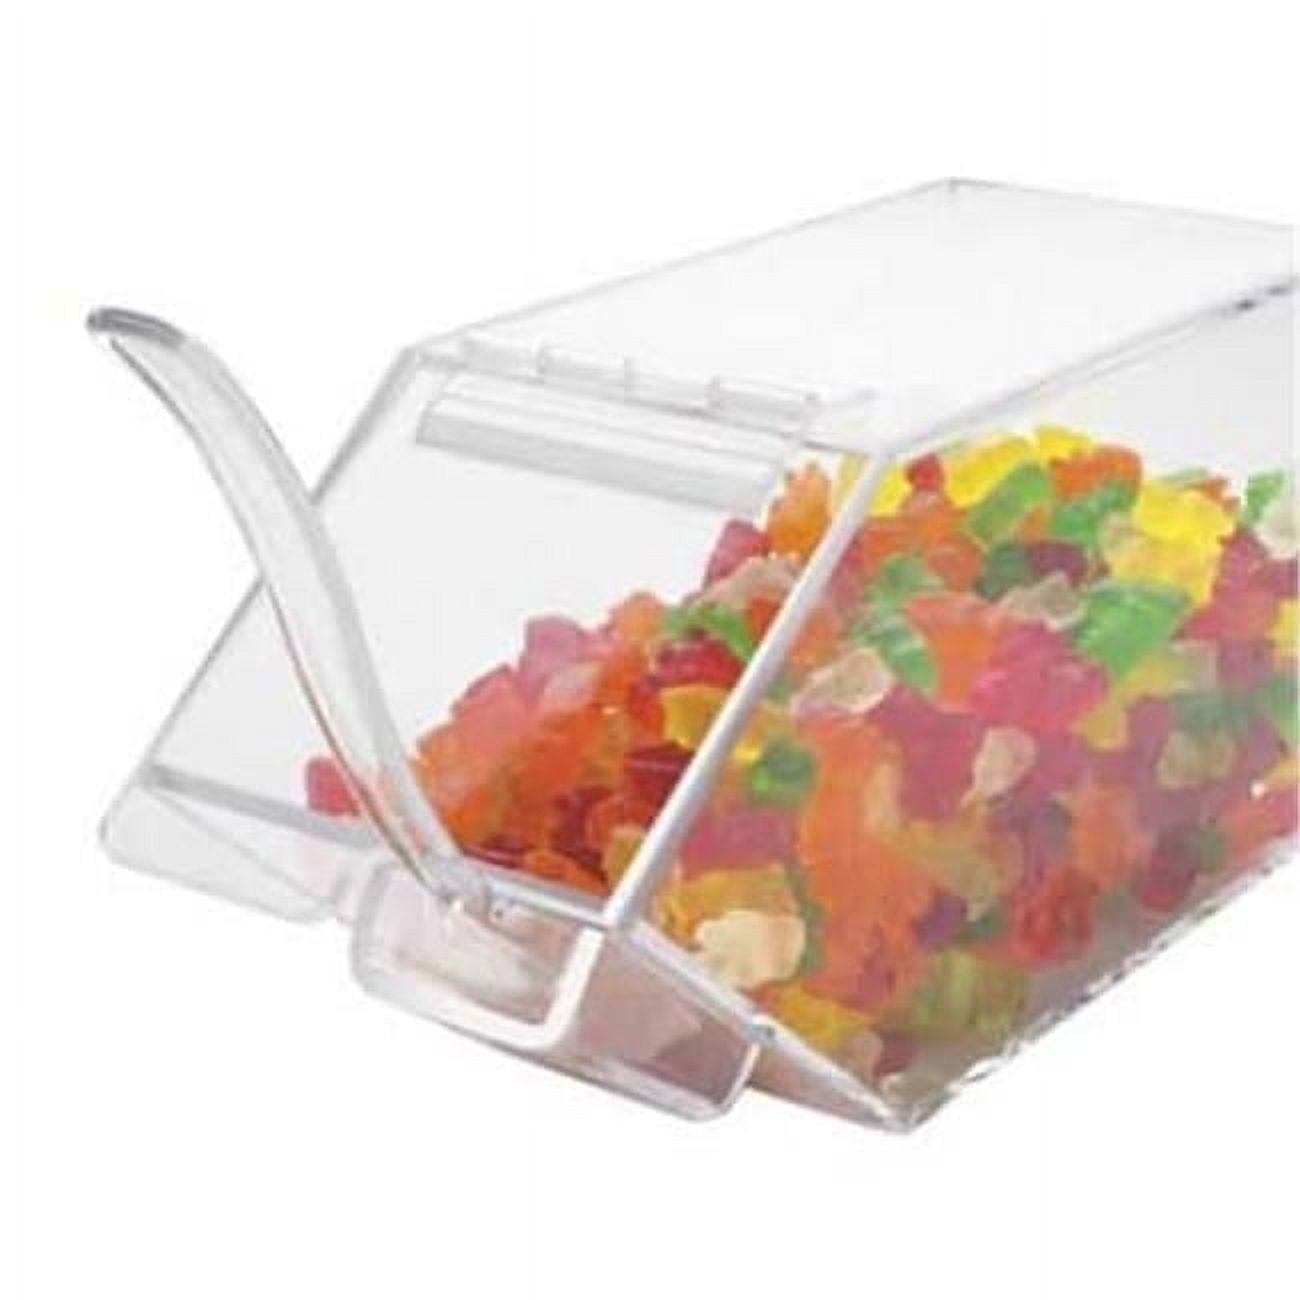 492-h Classic Stackable Topping Dispenser With Holster - 4.5 X 11 X 5.5 In.